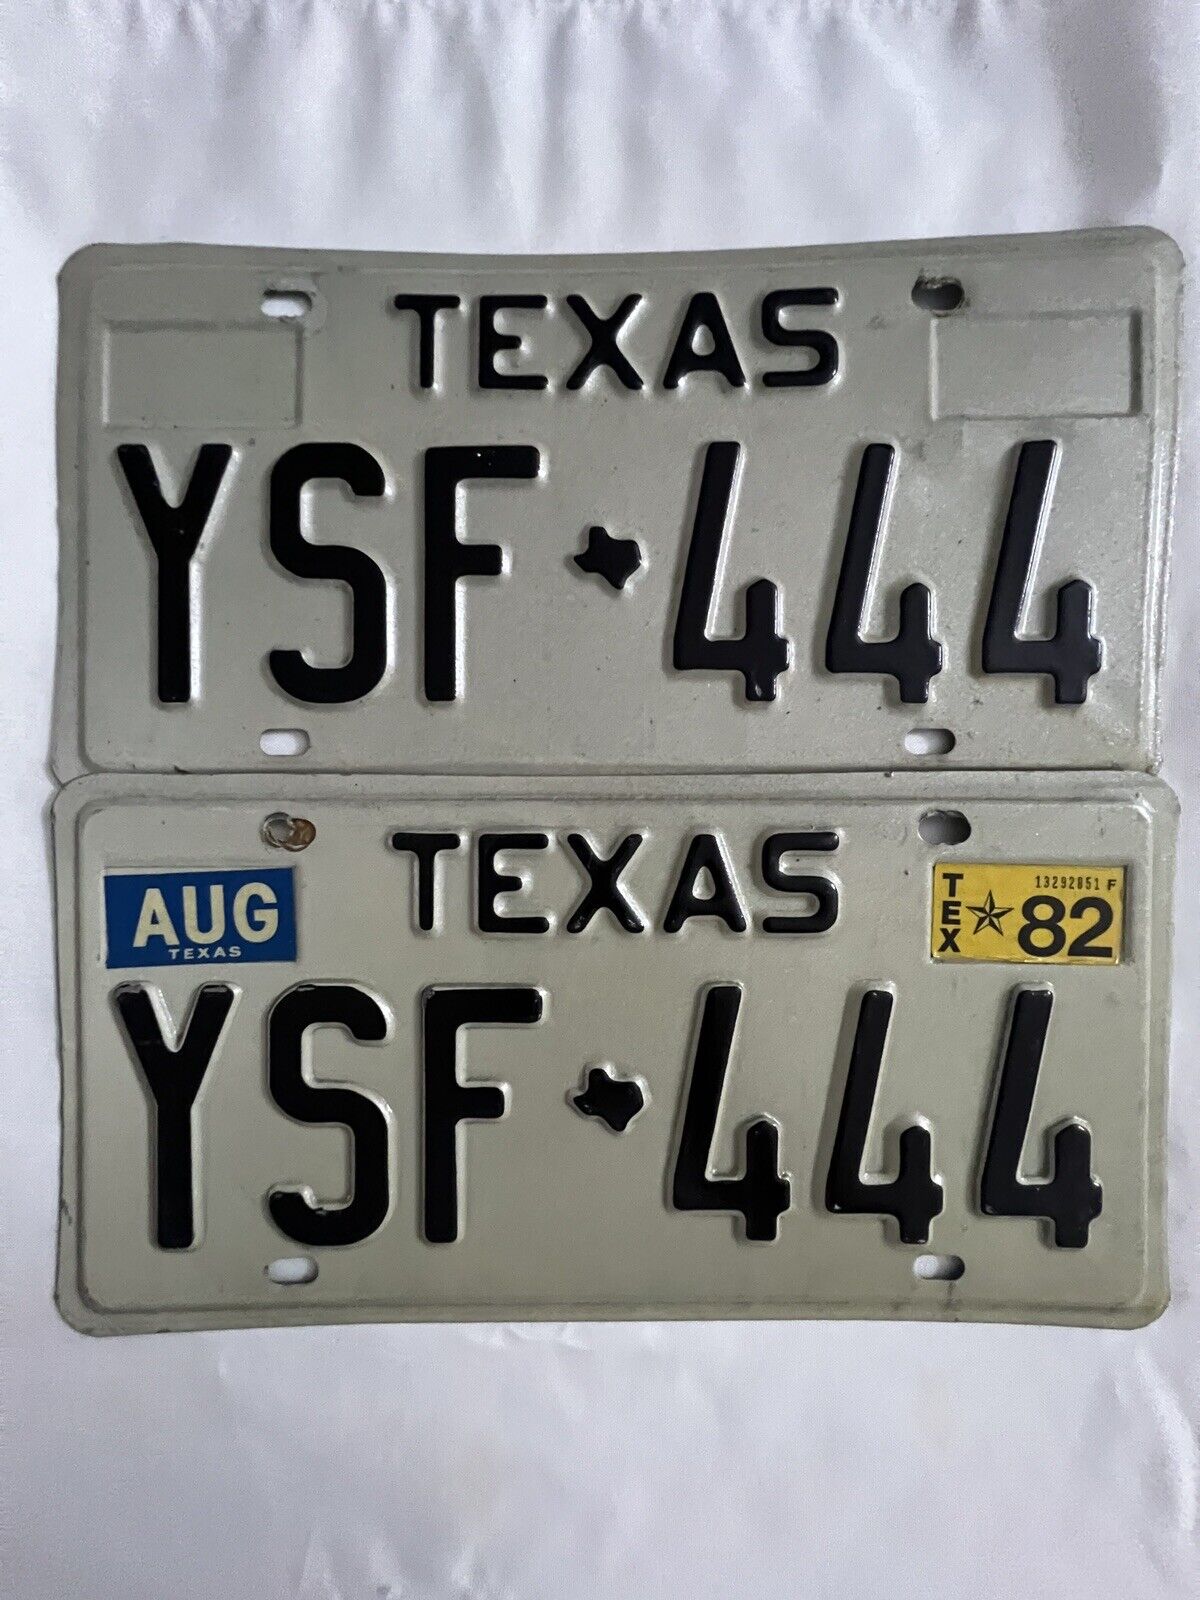 LICENCE PLATE PAIR TEXAS TITLED YSF-444 IN EXCELLENT CONDITION